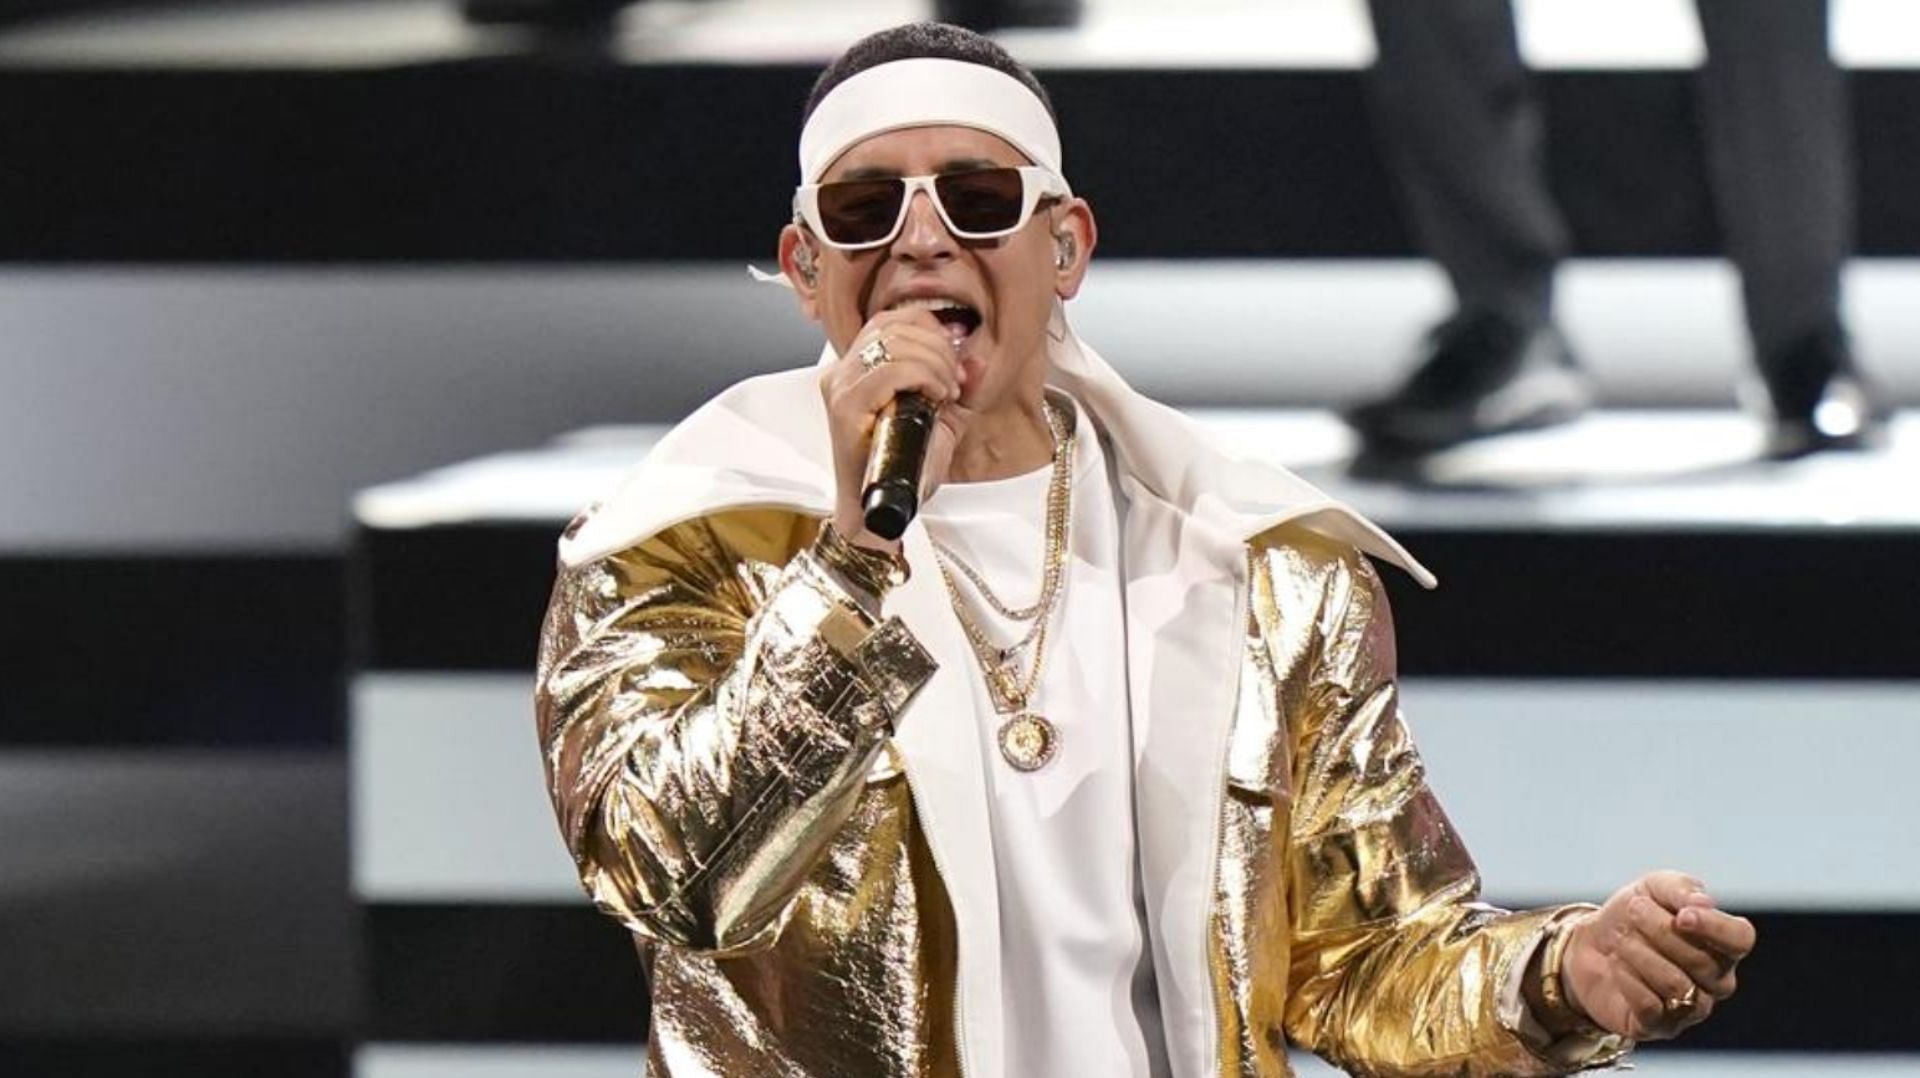 Daddy Yankee Tour 2022 tickets Presale, where to buy, dates, and more